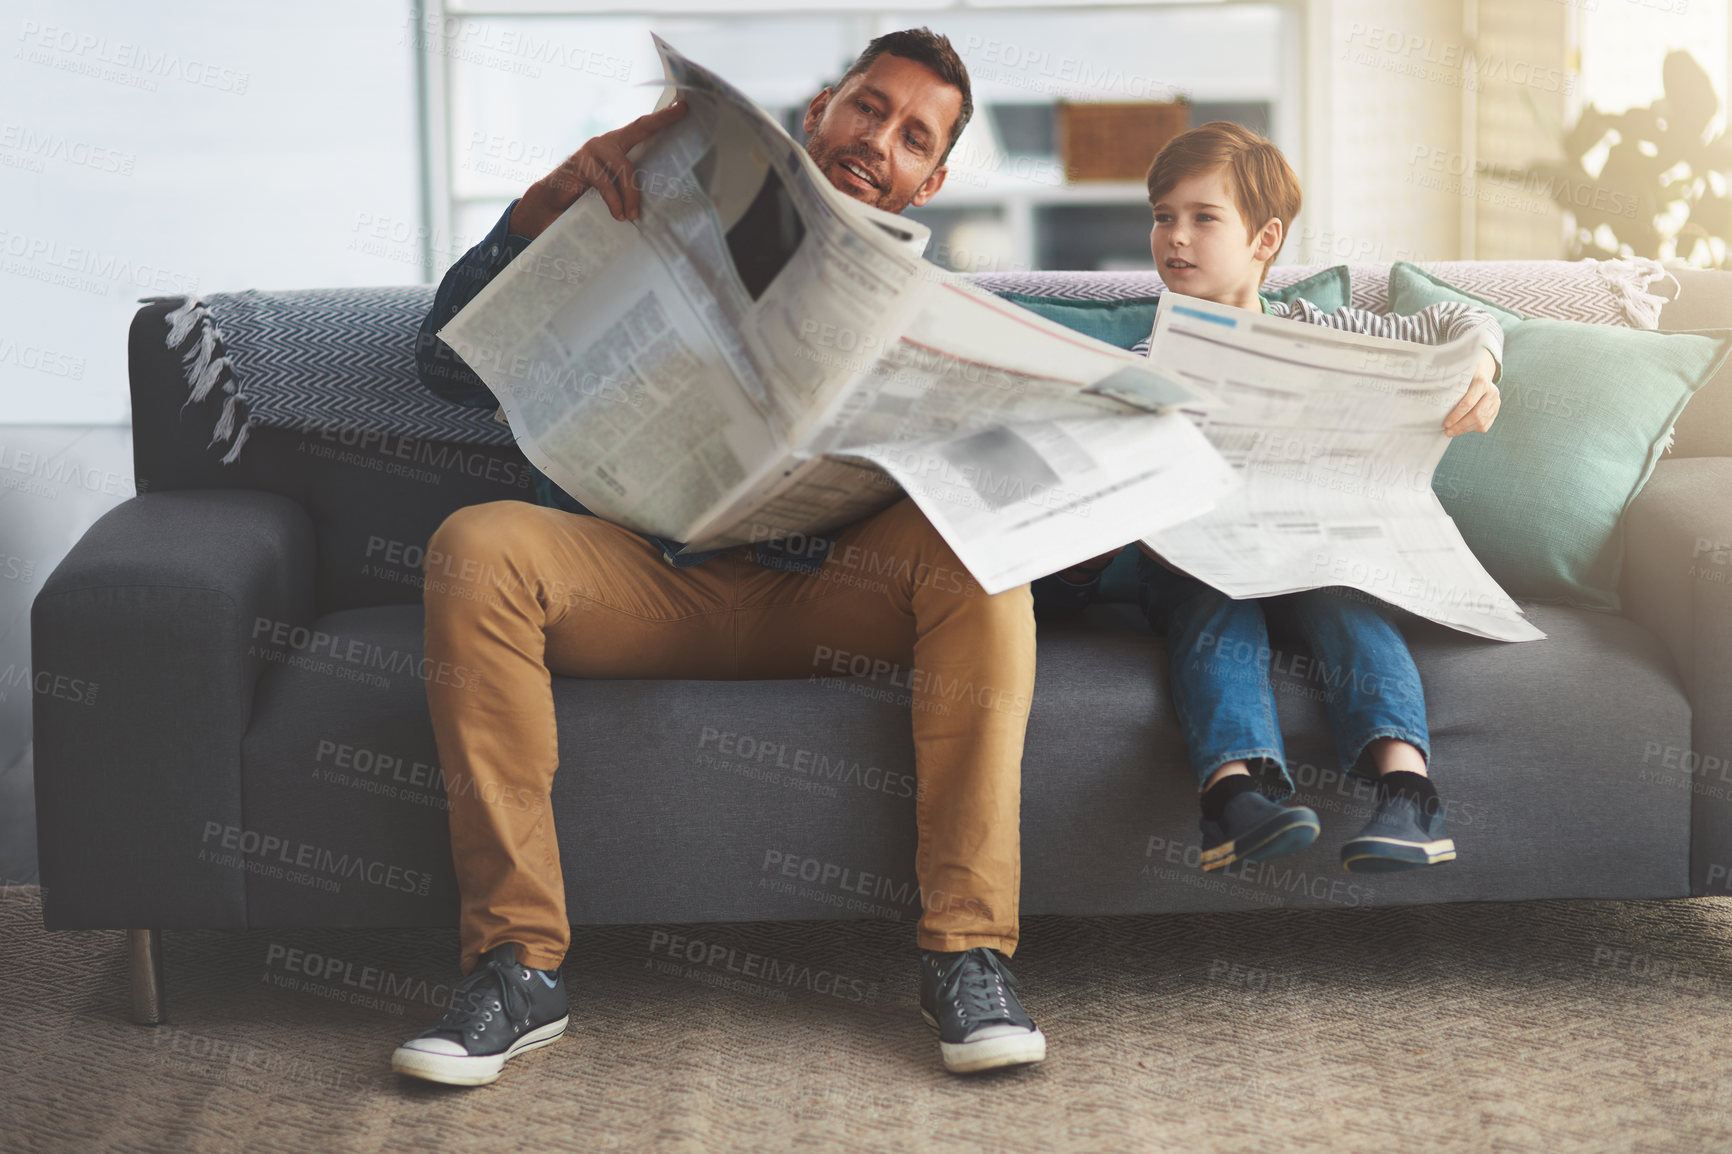 Buy stock photo Shot of a carefree little boy and his father reading the newspaper while being seated on the sofa at home during the day